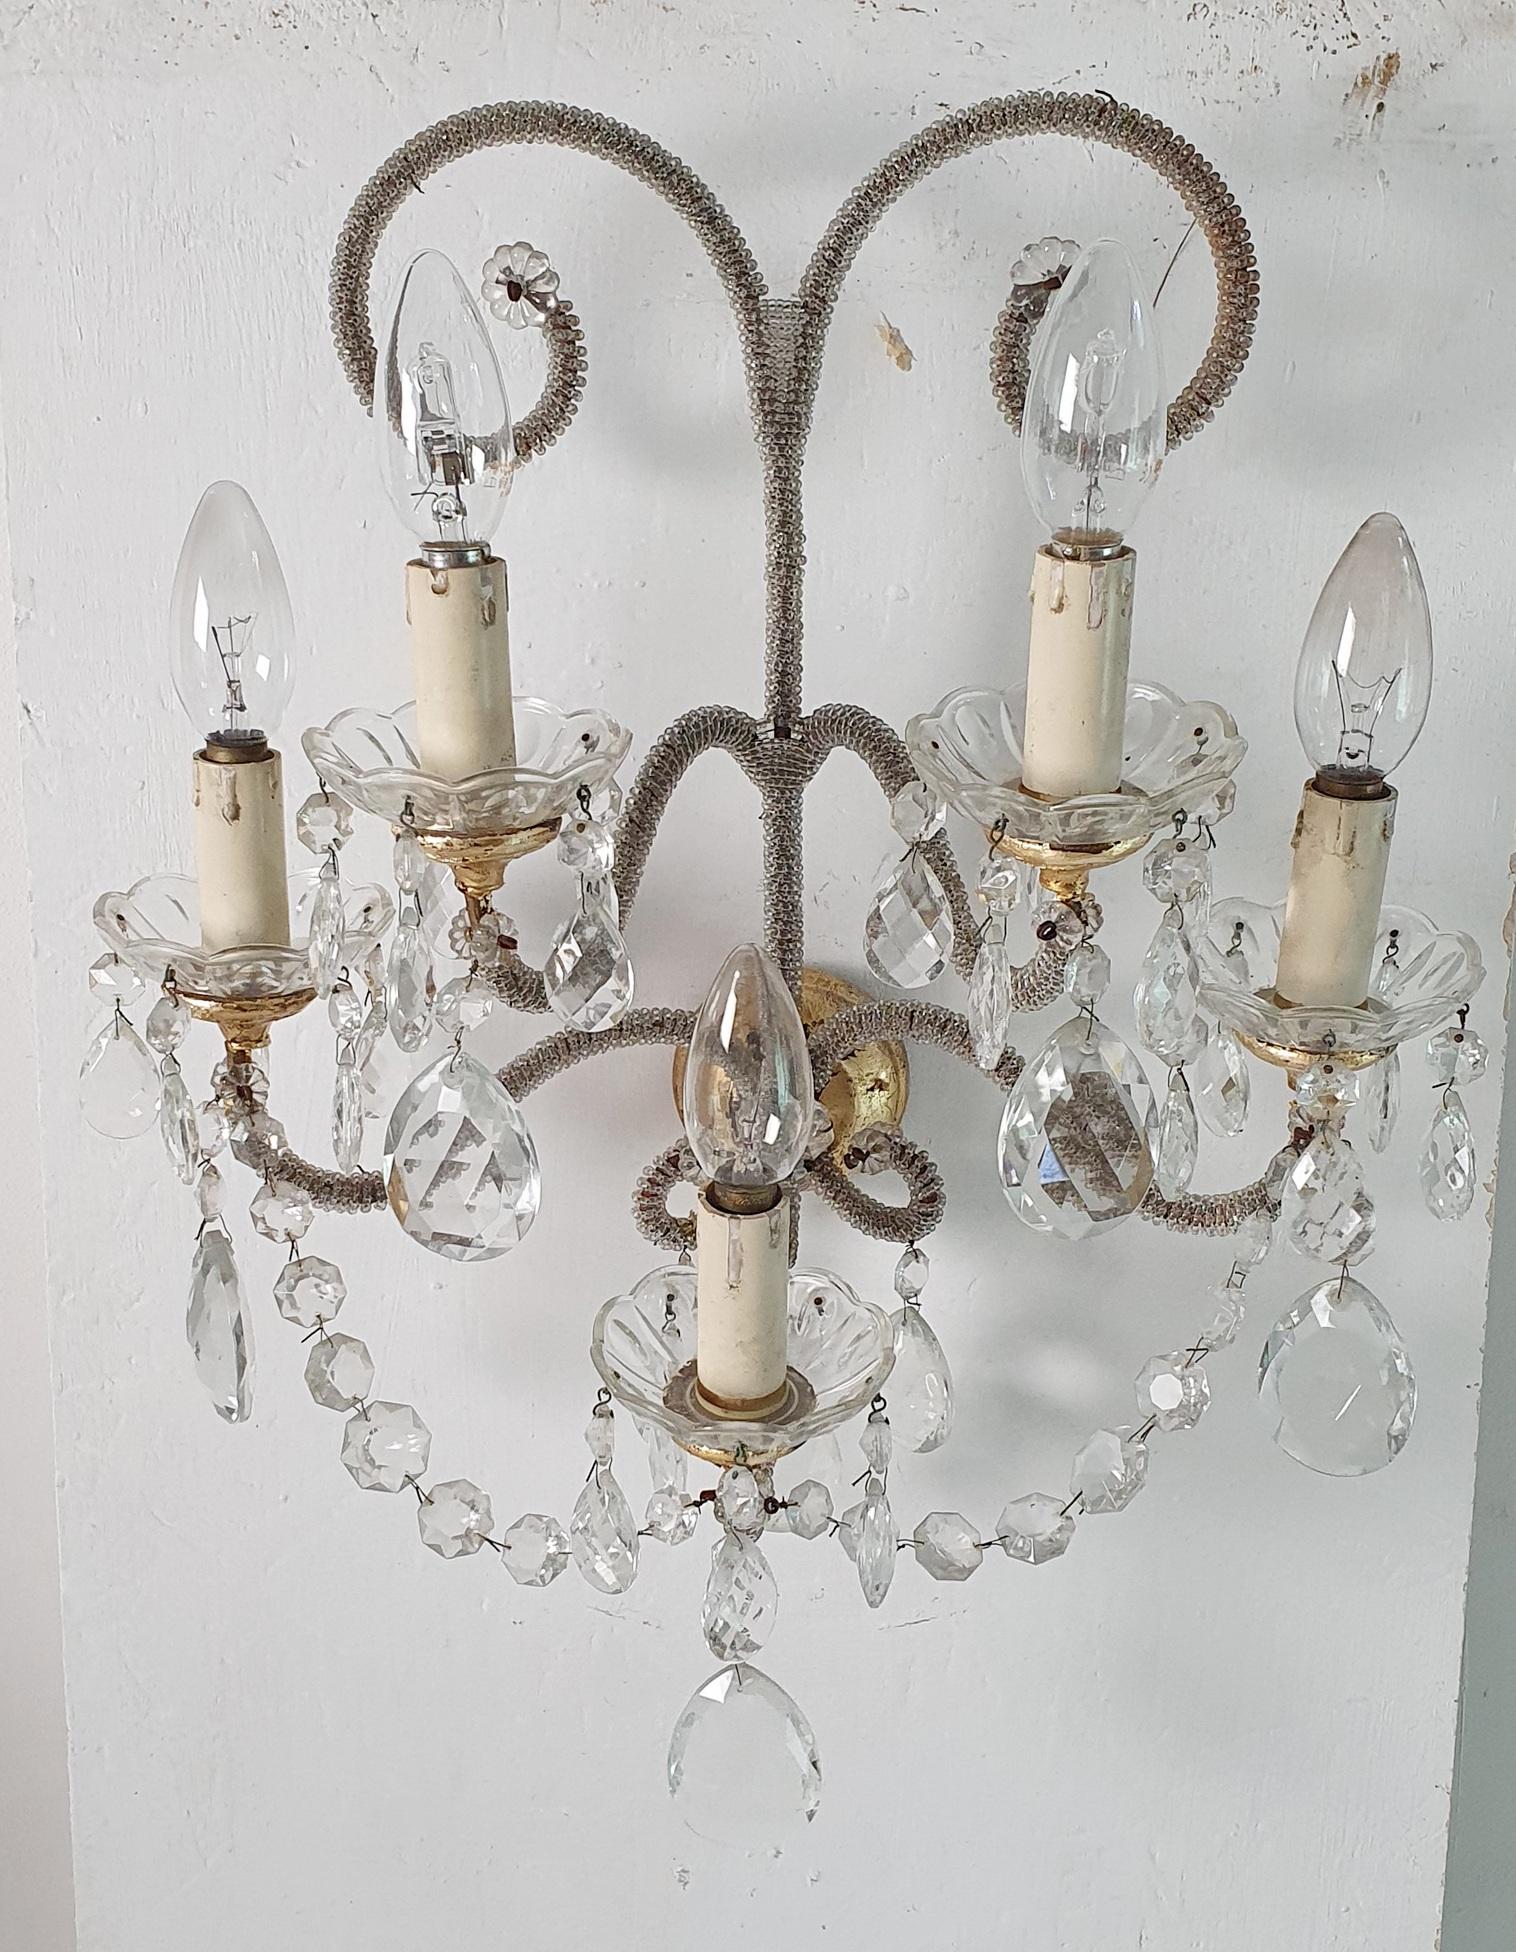 A pair of semi antique wall sconces in the manner of Maison Baguès. Each sconce has five candle style lightbulb holders and is decorated with clear and clear crystals and glass beads. The sconces are made from iron and painted in gold with added